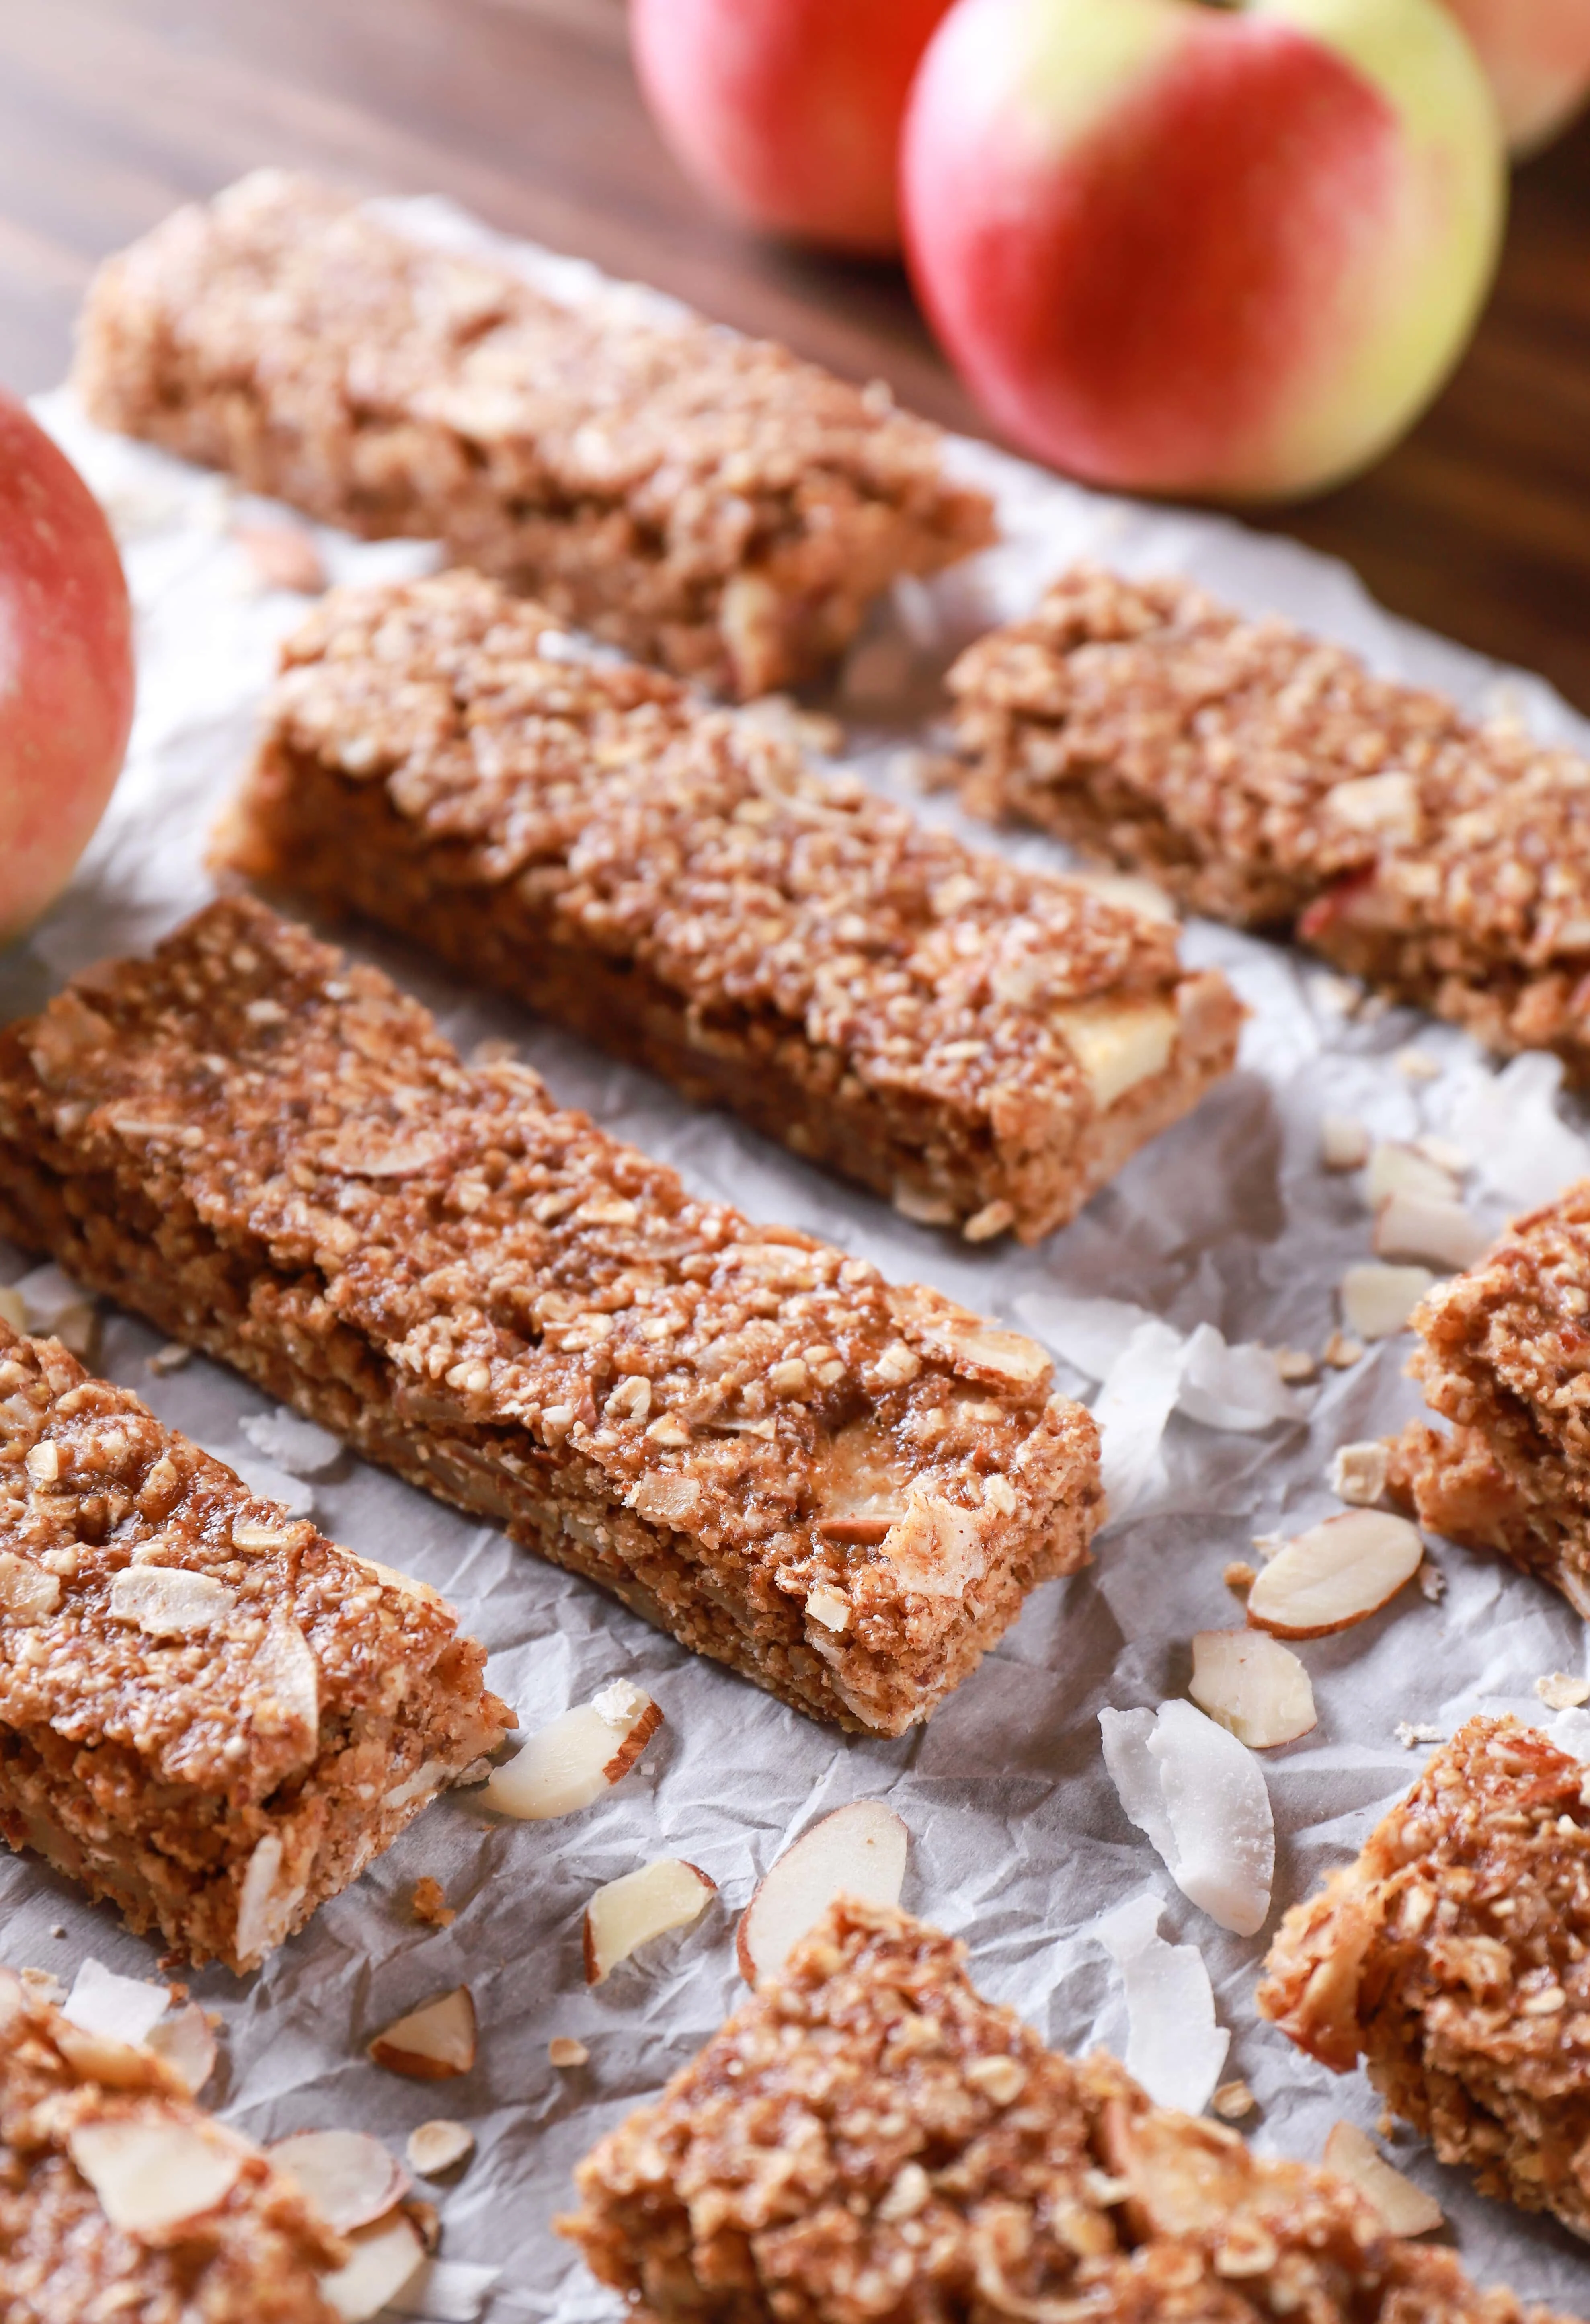 Soft Baked Apple Almond Granola Bars with apples, coconut, sliced almonds, and oats. Recipe from A Kitchen Addiction